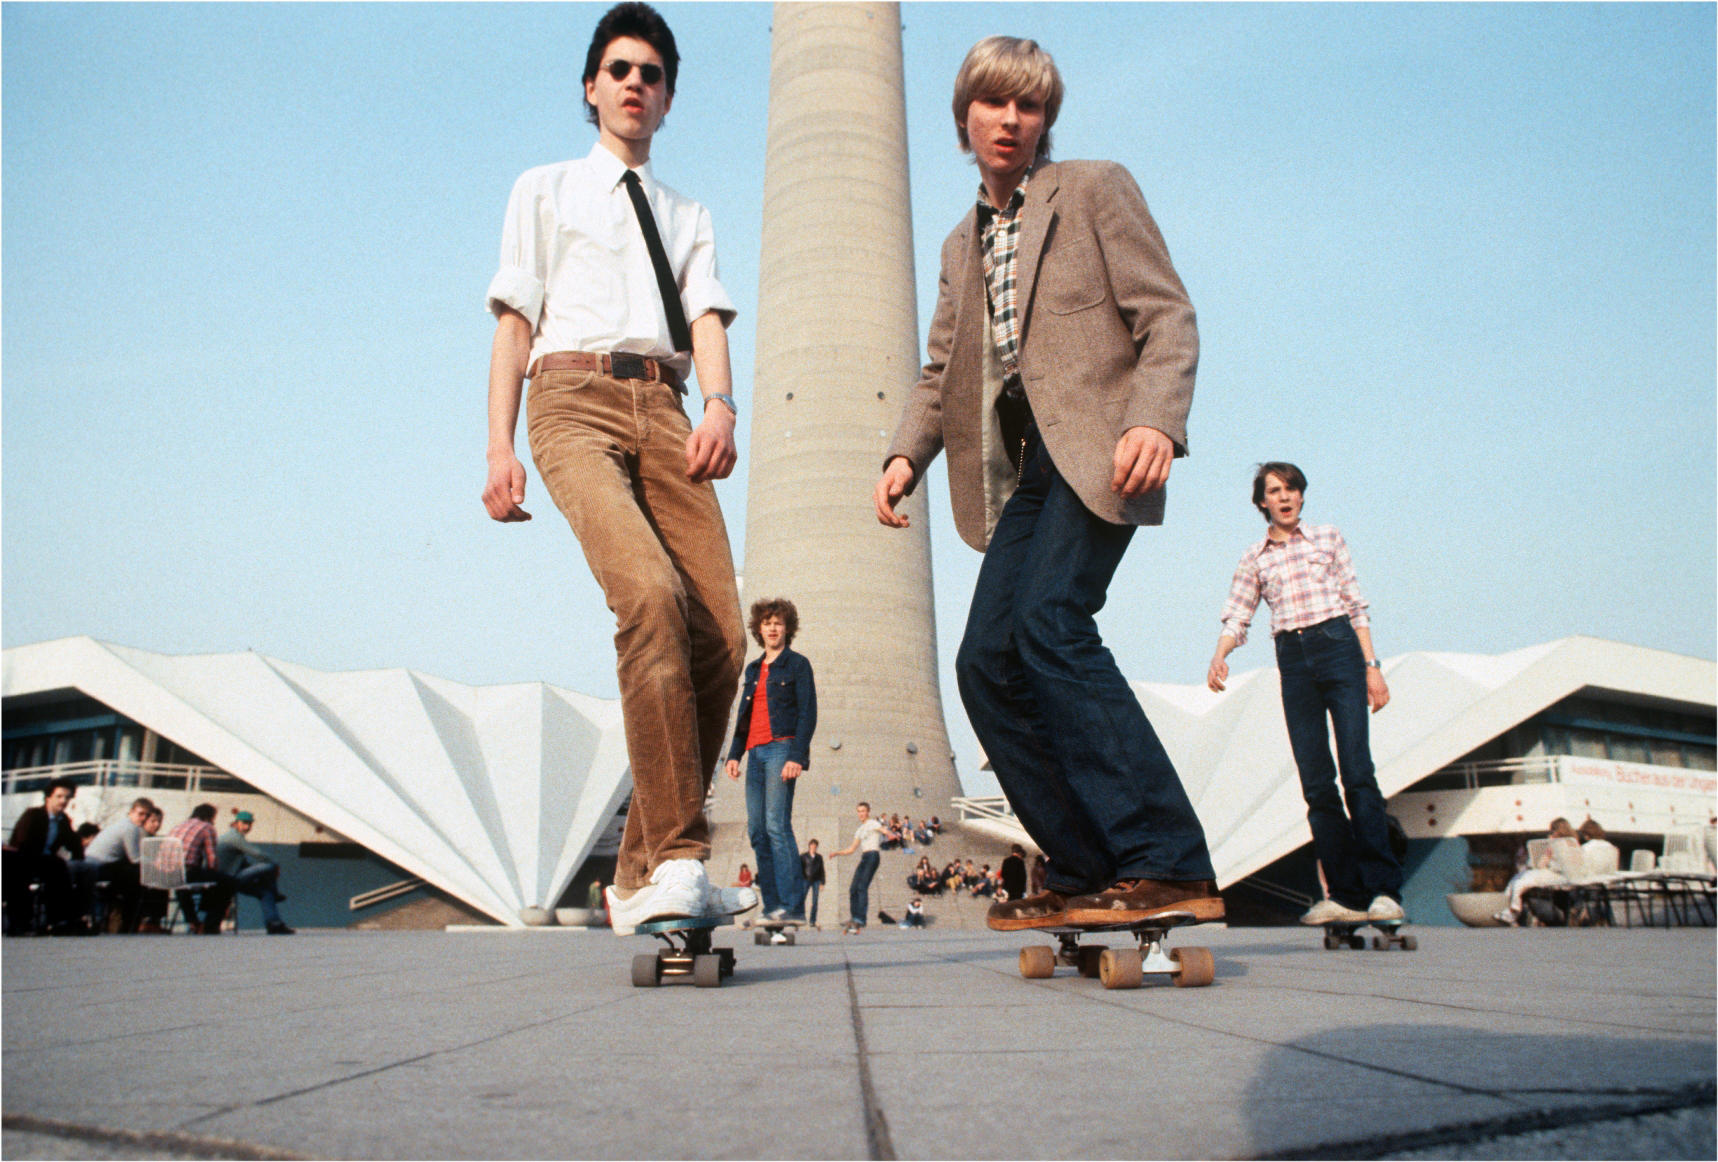 Skateboarding was a form of rebellion in cold war East Germany.